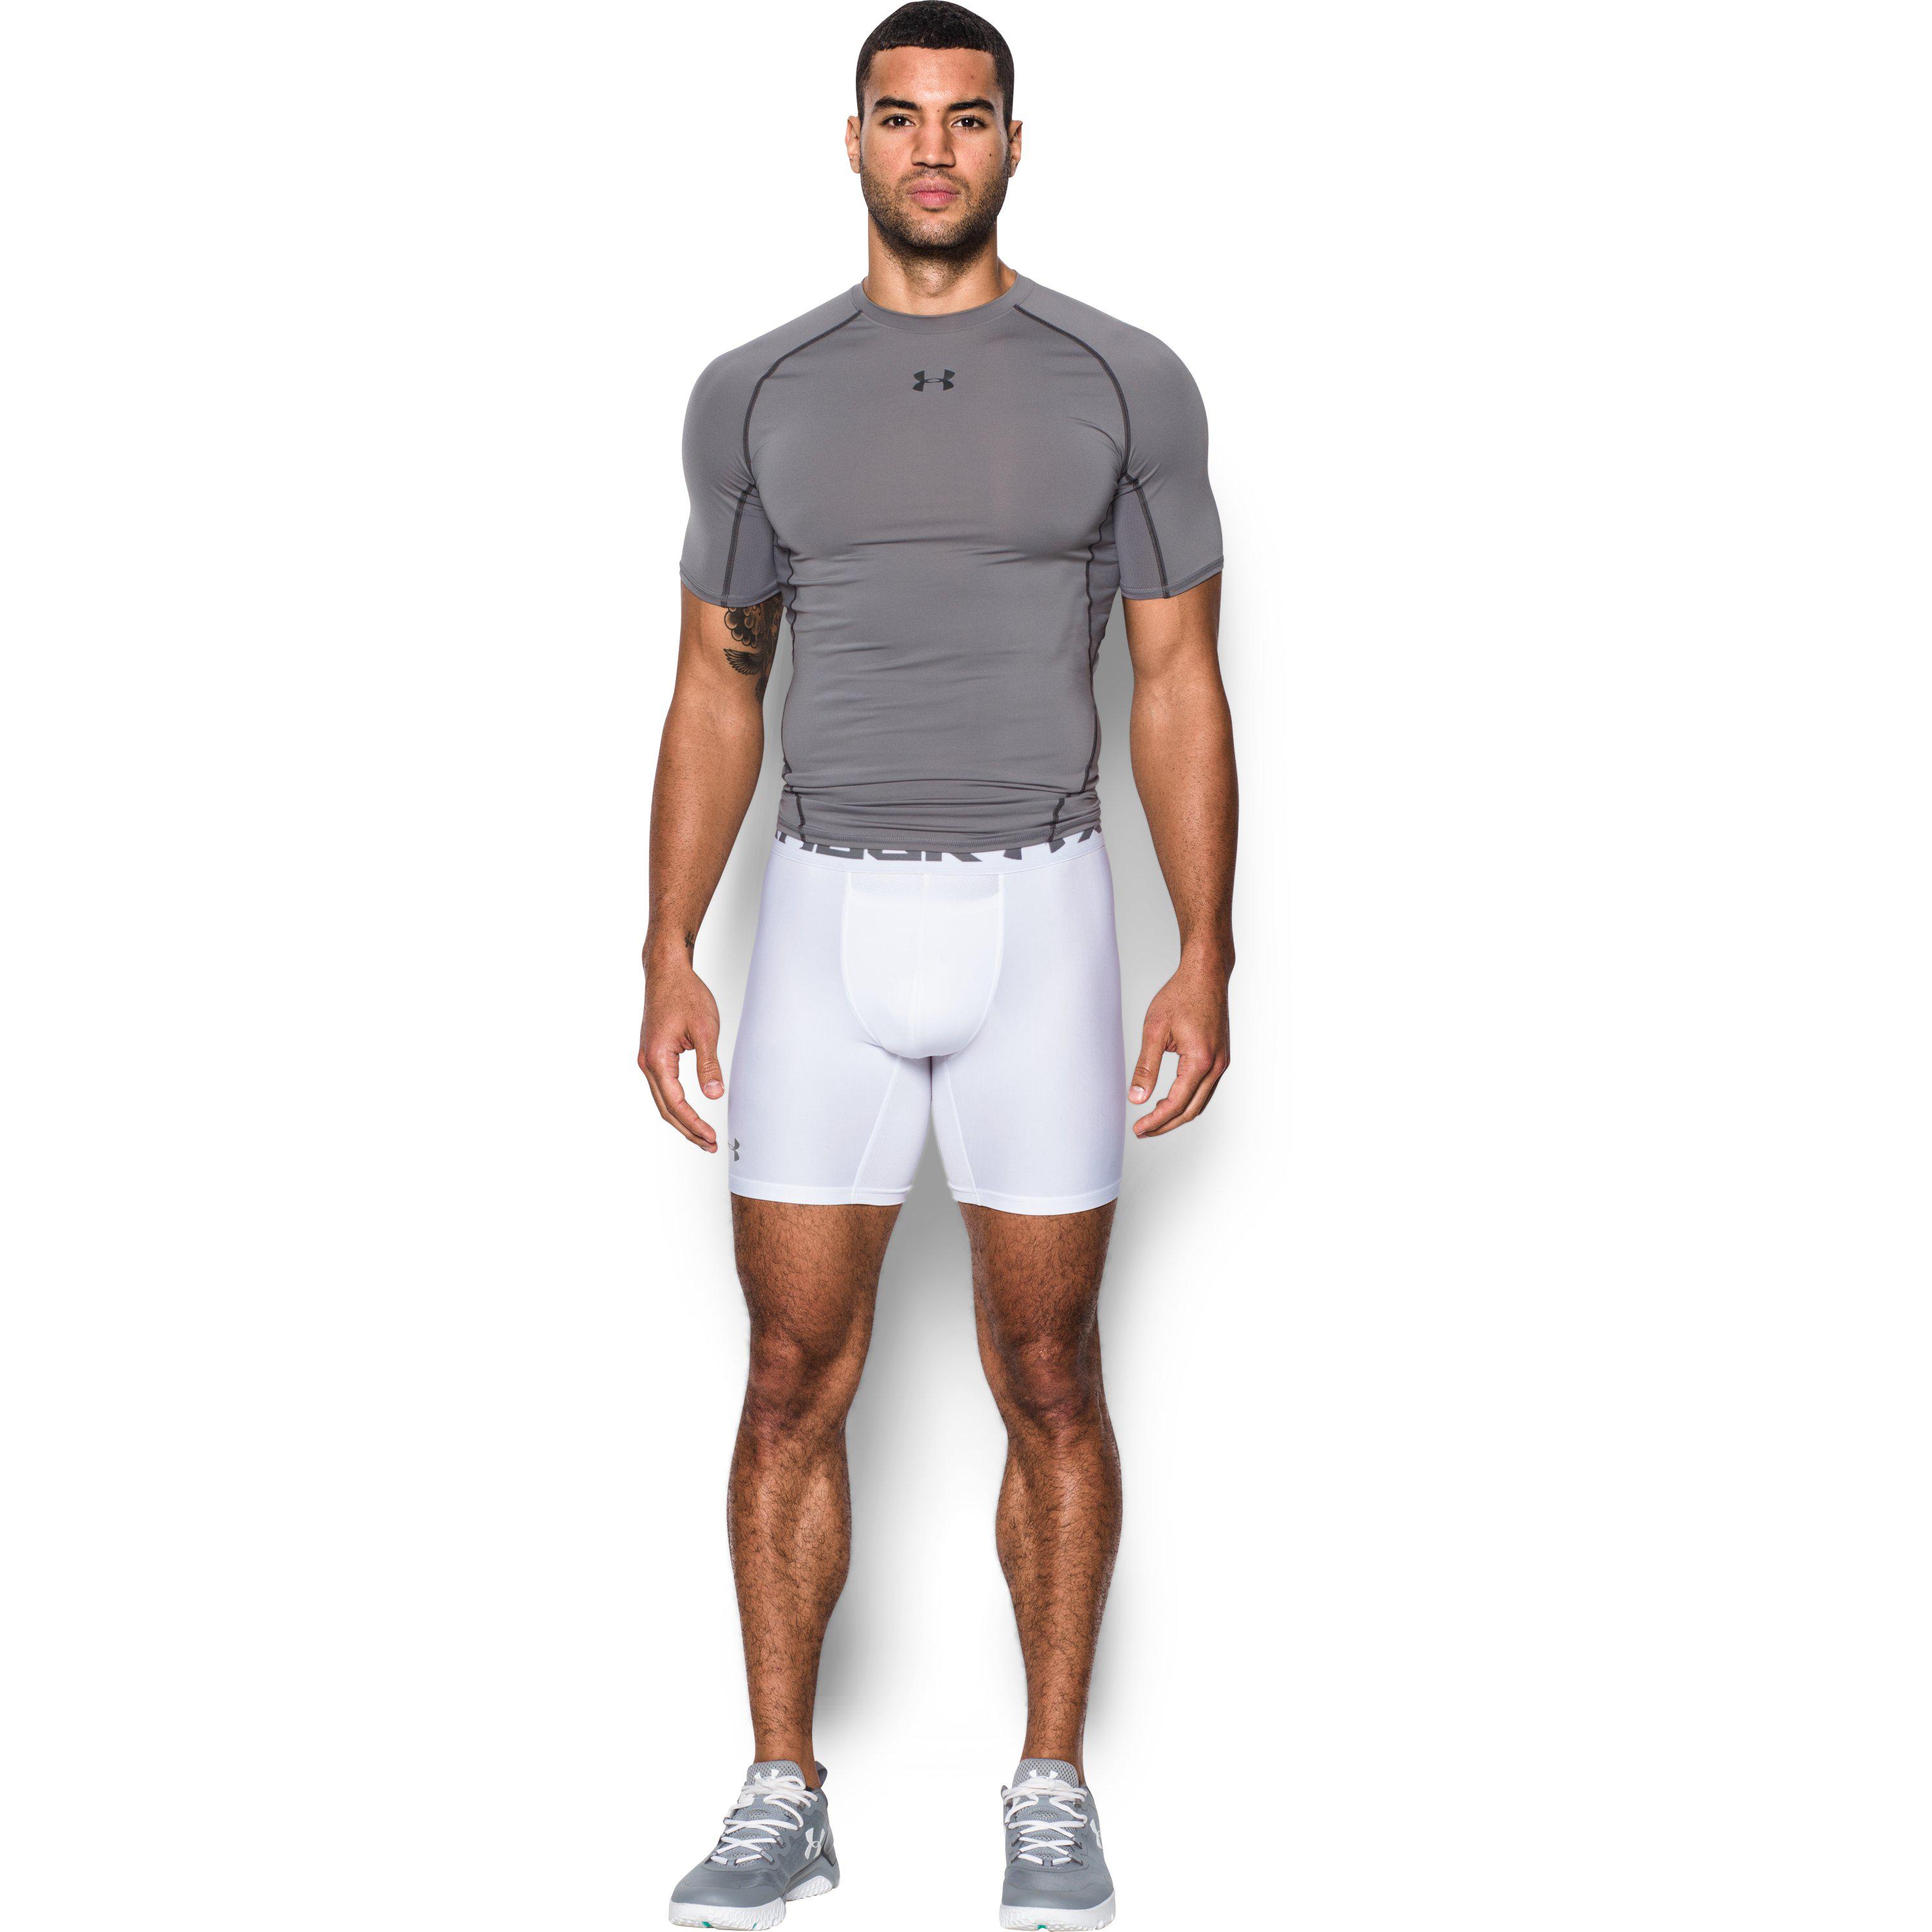 Under Armour Men's Heatgear® Armour Compression Shorts W/ Cup in 